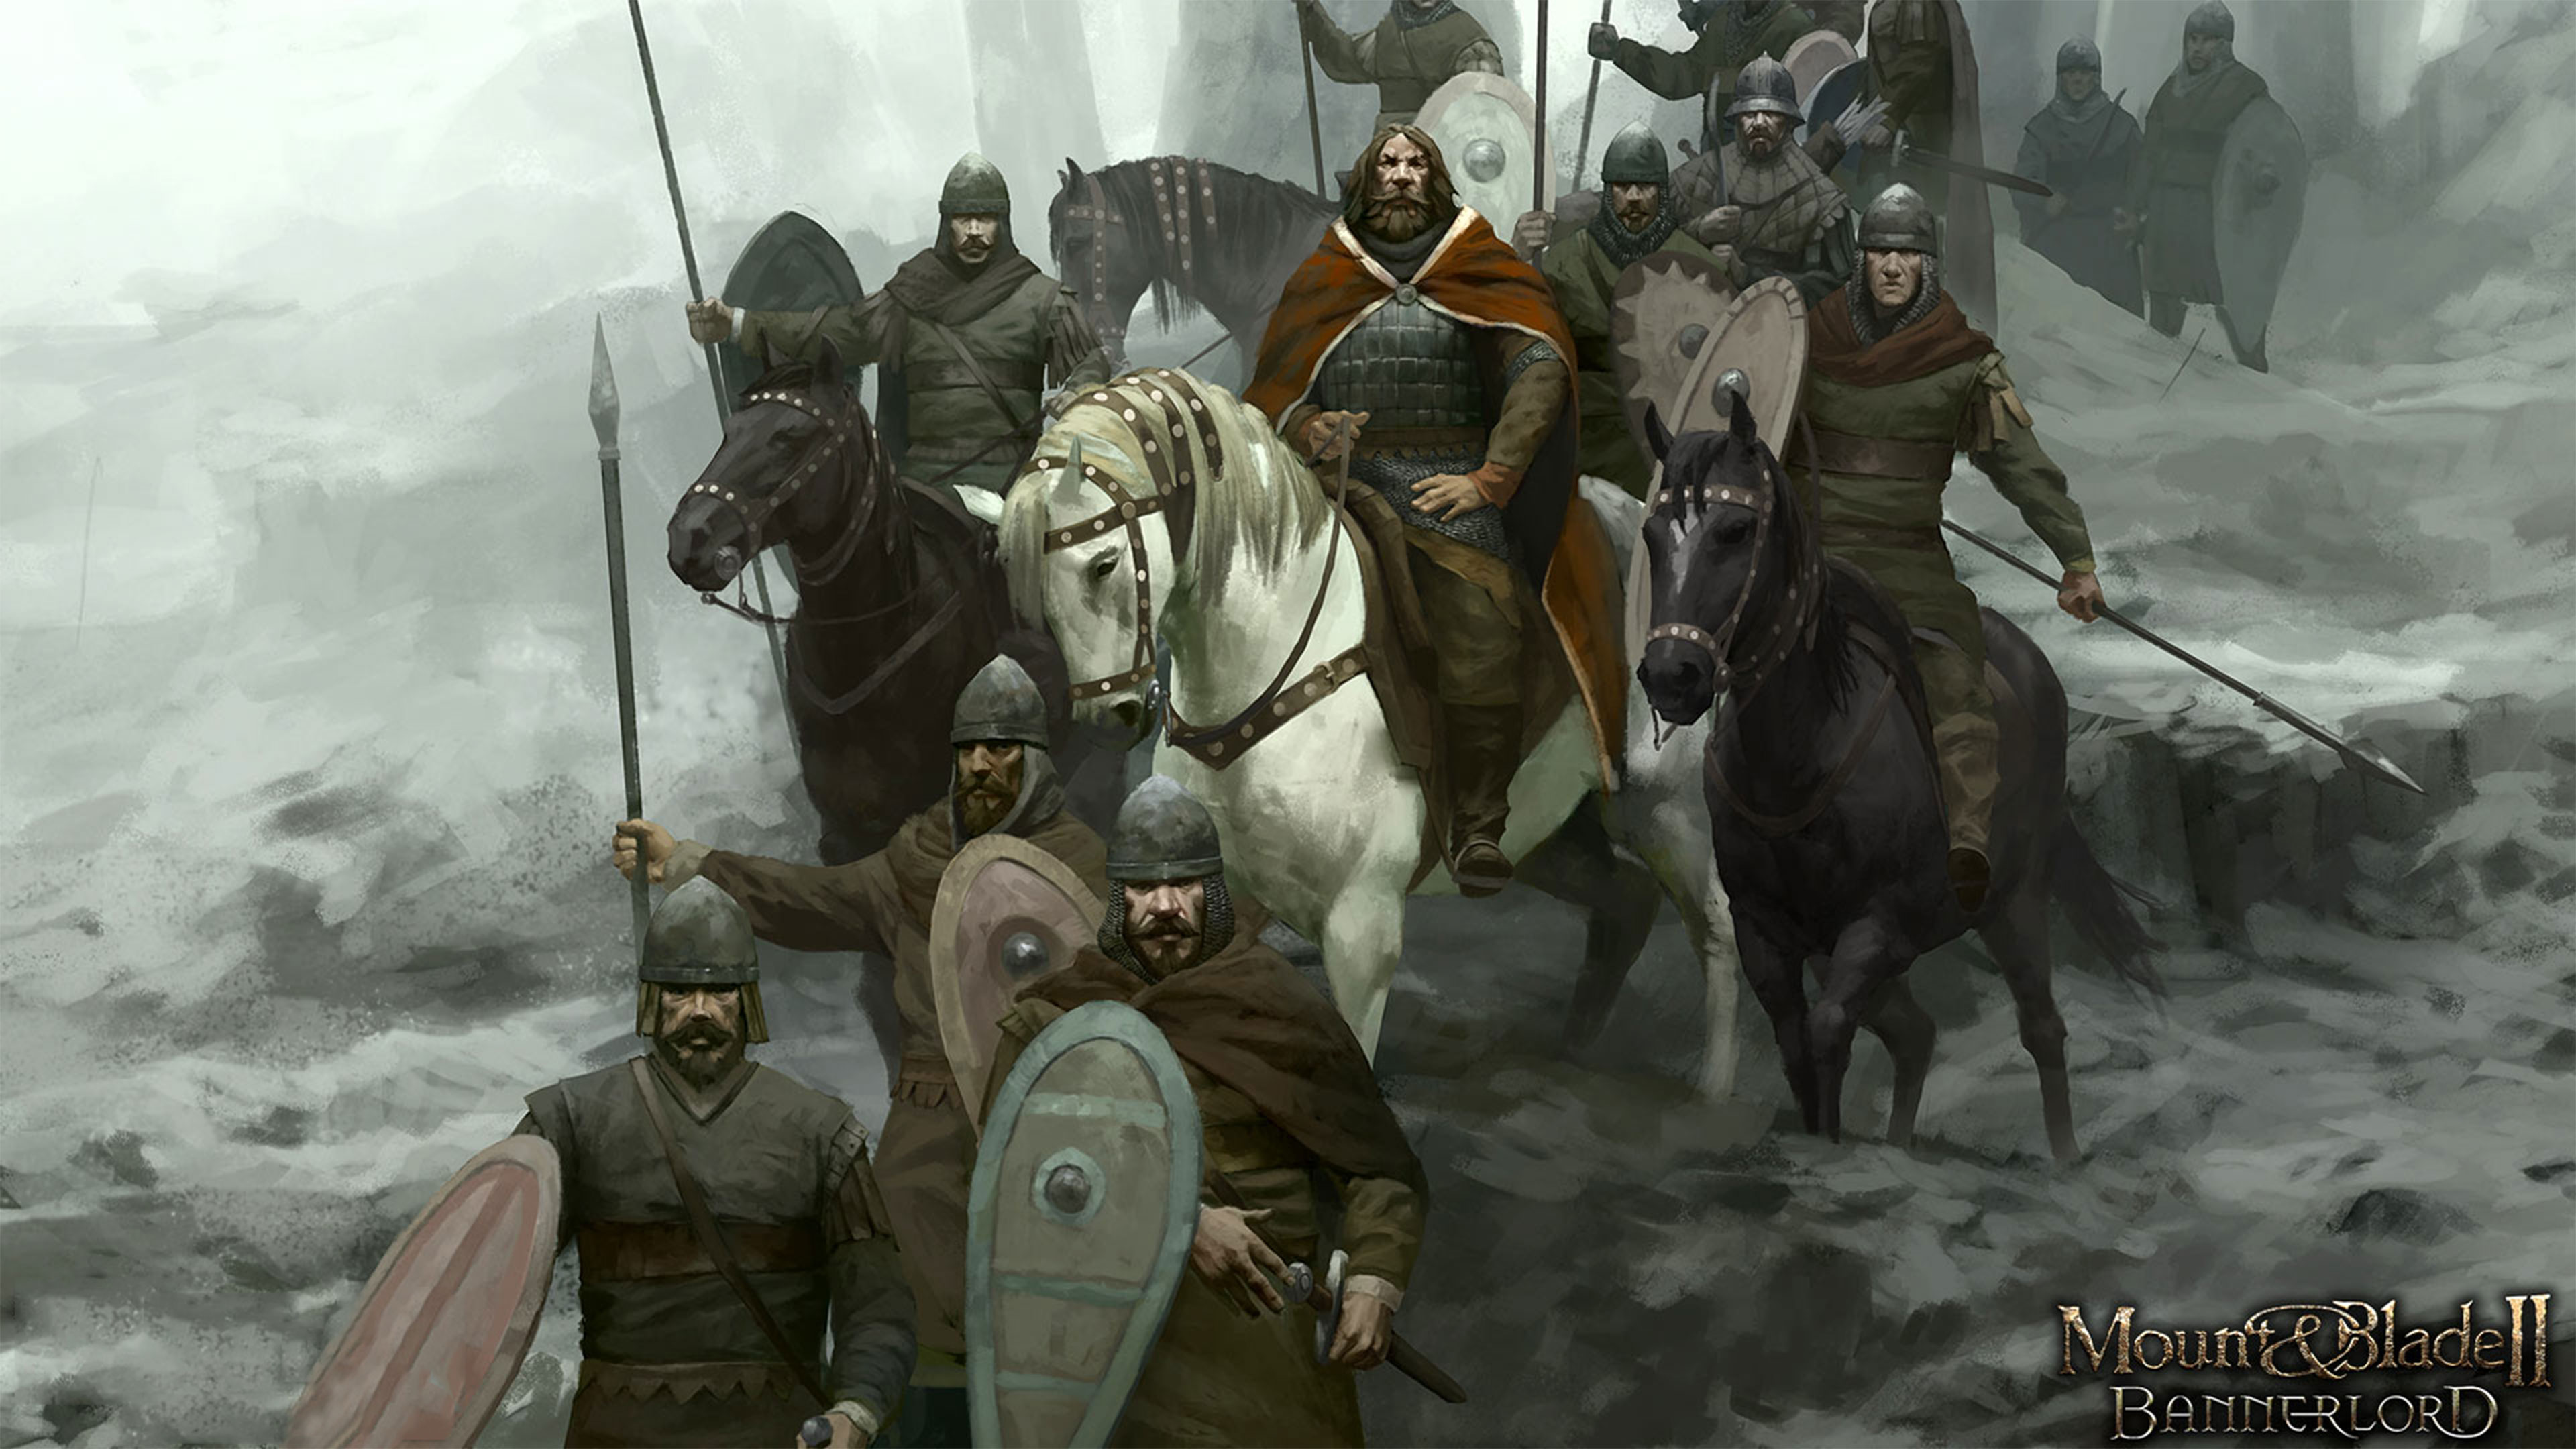 Mount Blade 2 Bannerlord Wallpapers In Ultra Hd 4k Gameranx